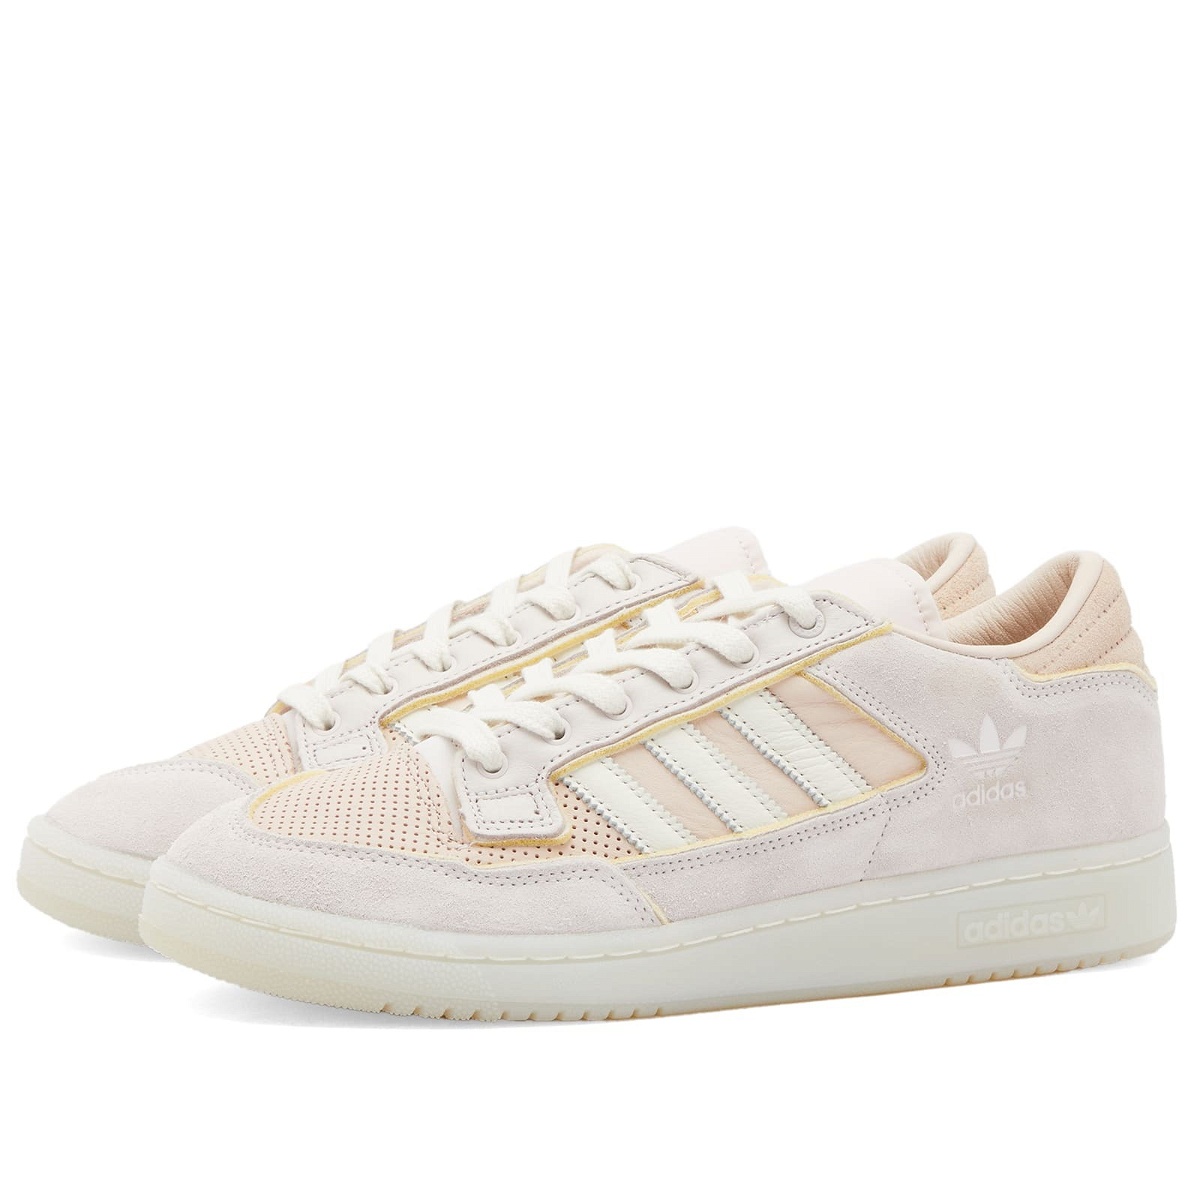 Photo: Adidas Men's x Offspring Centennial Low Sneakers in Off White/Easy Yellow